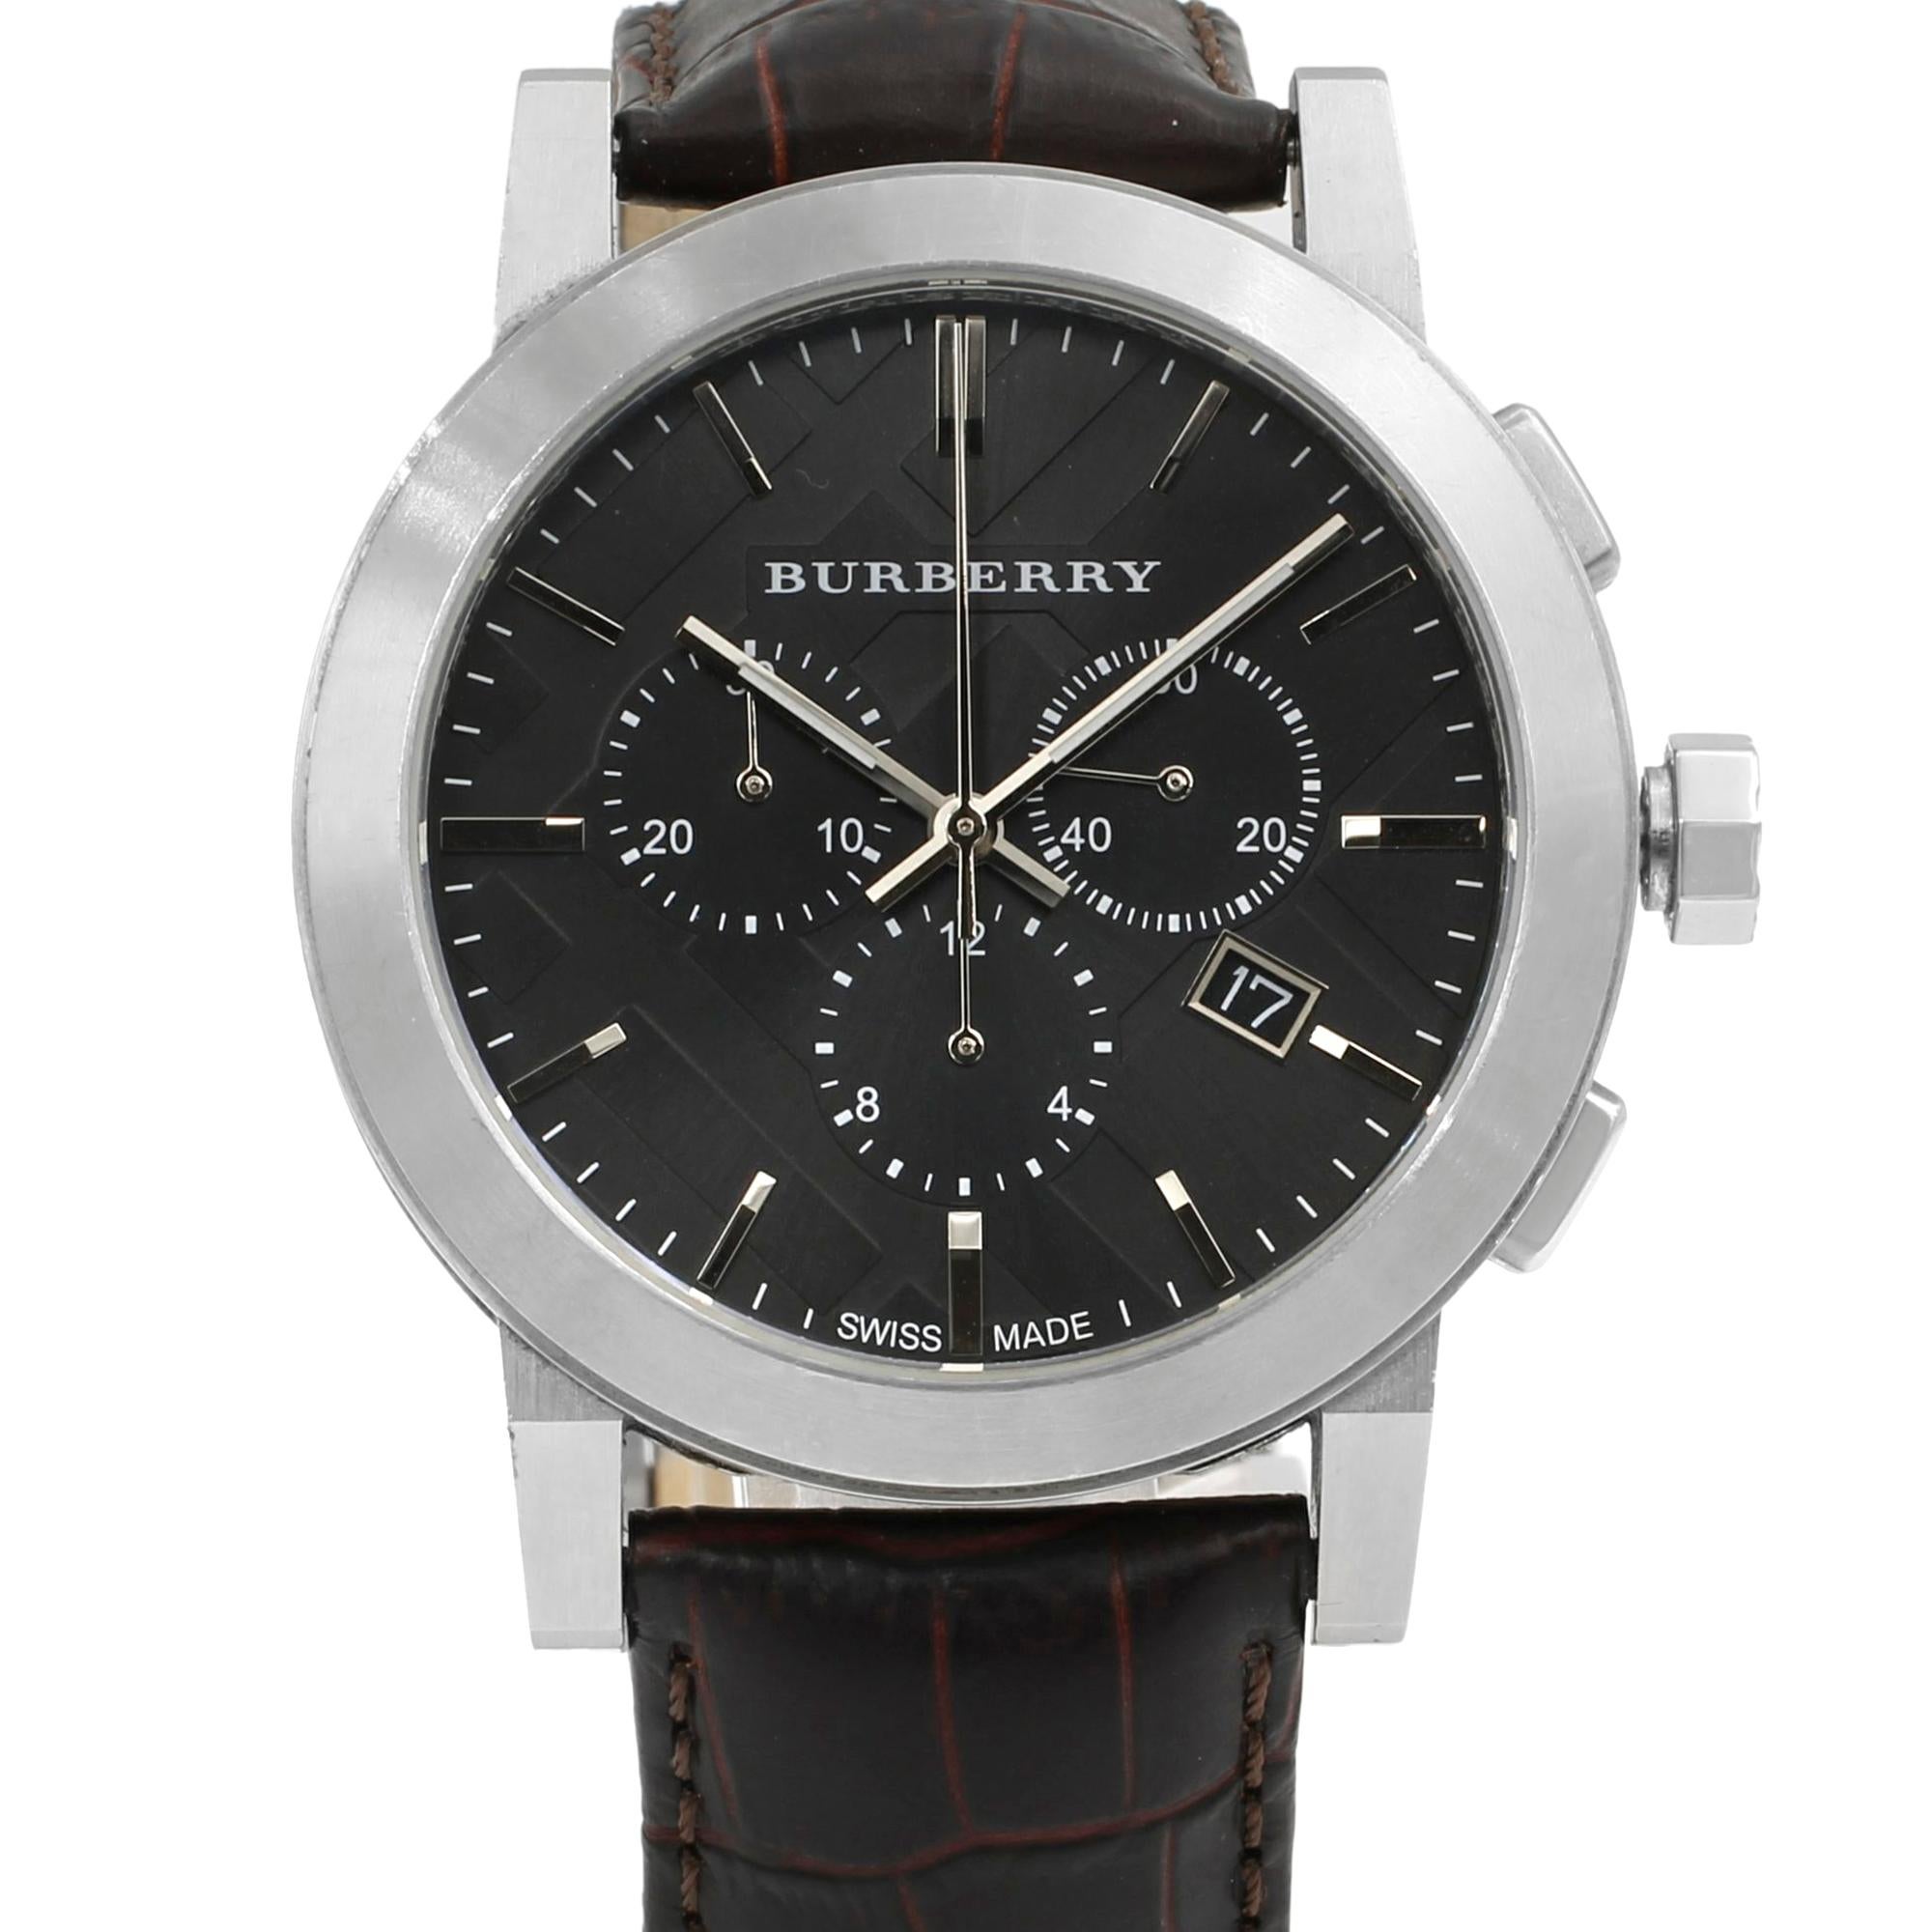 This pre-owned Burberry The City BU9356 is a beautiful men's timepiece that is powered by quartz (battery) movement which is cased in a stainless steel case. It has a round shape face, chronograph, date indicator, small seconds subdial dial and has